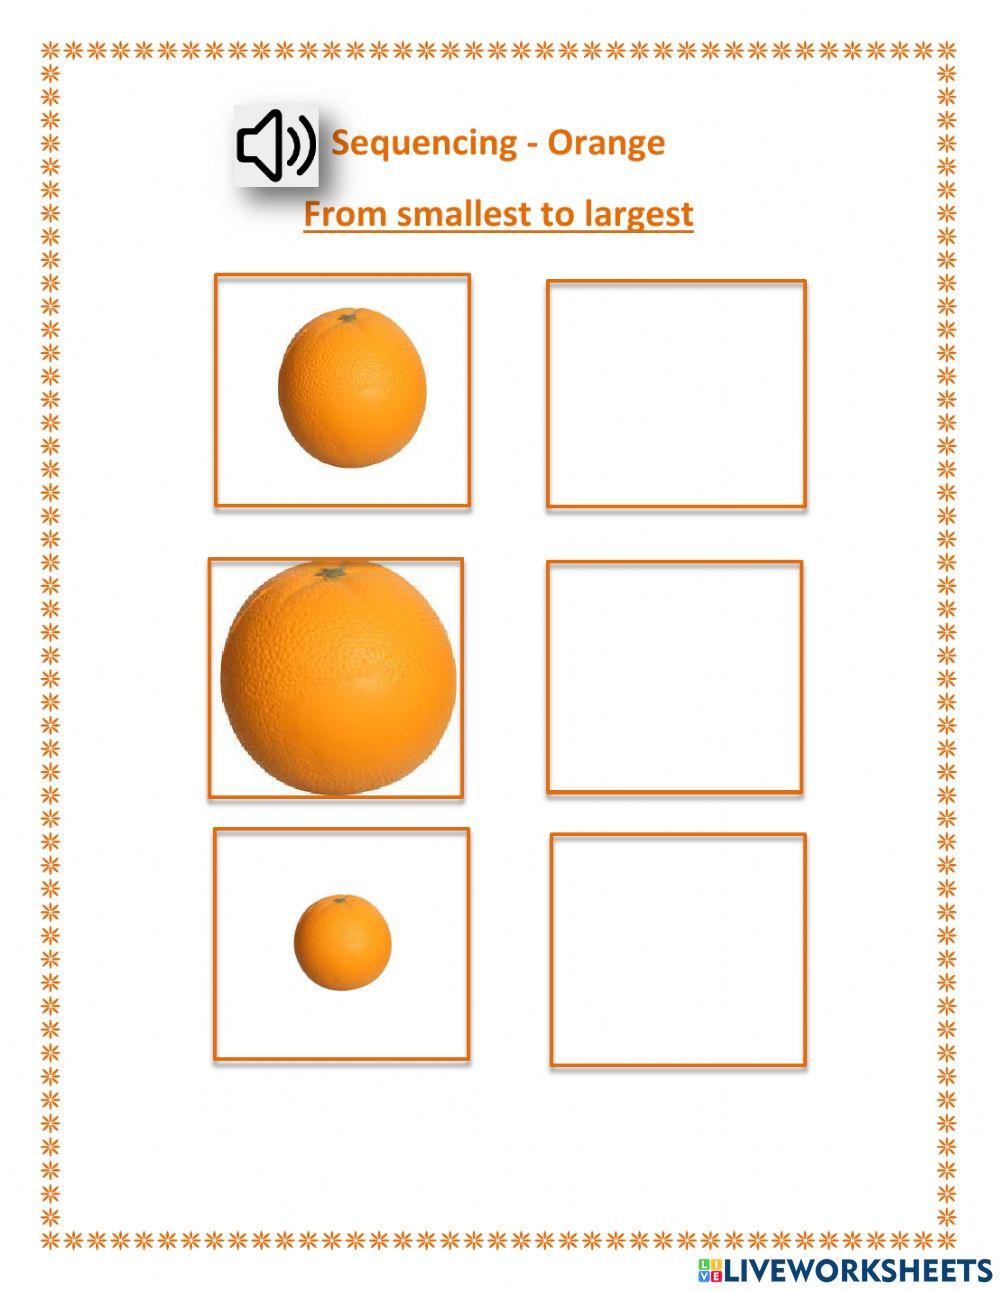 Sequencing - orange - smallest to largest - Dashly, Leo and DC